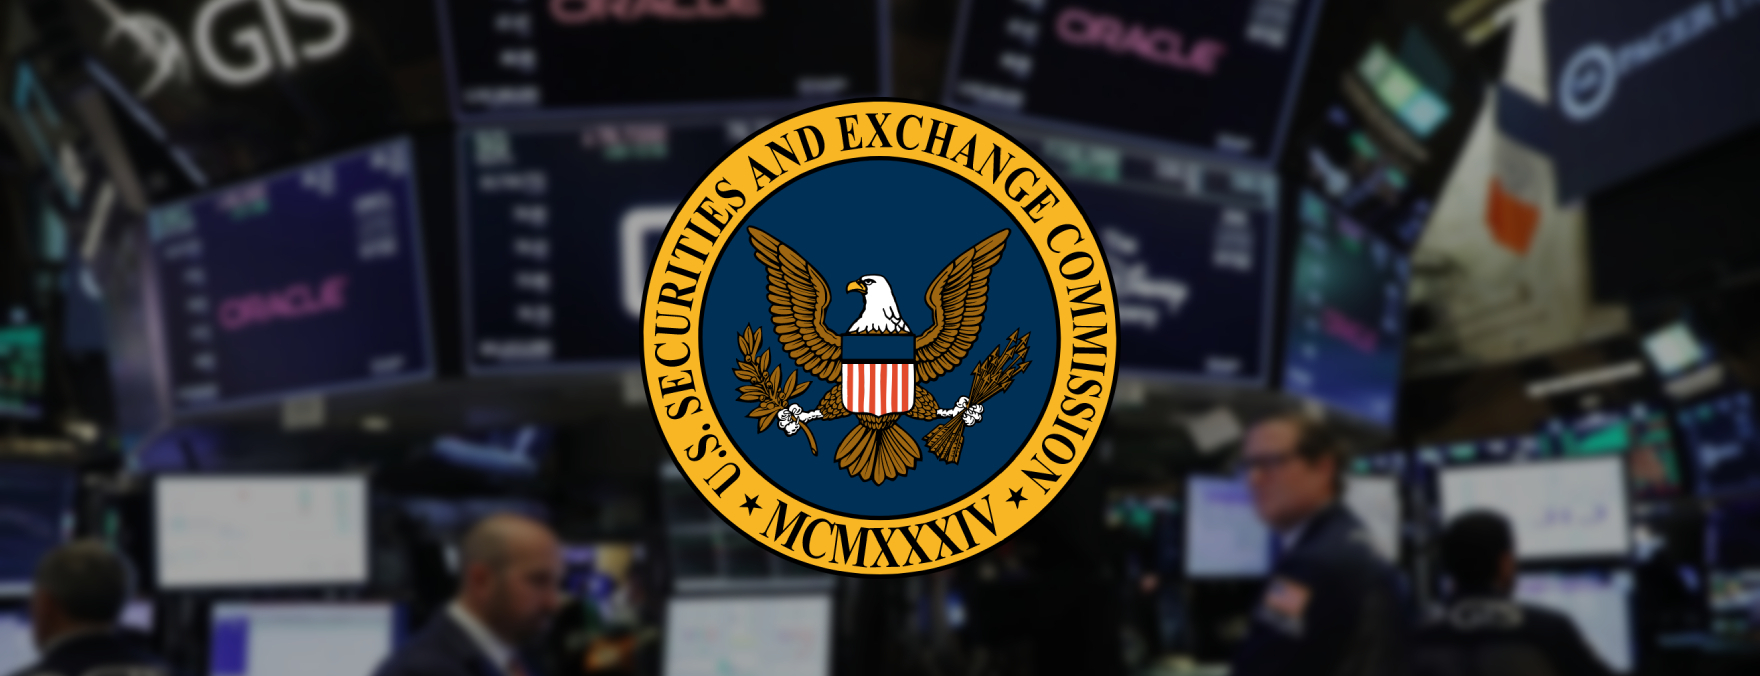 The Logo of US Security And Exchange Commission is placed in the centre of fuzzy image.